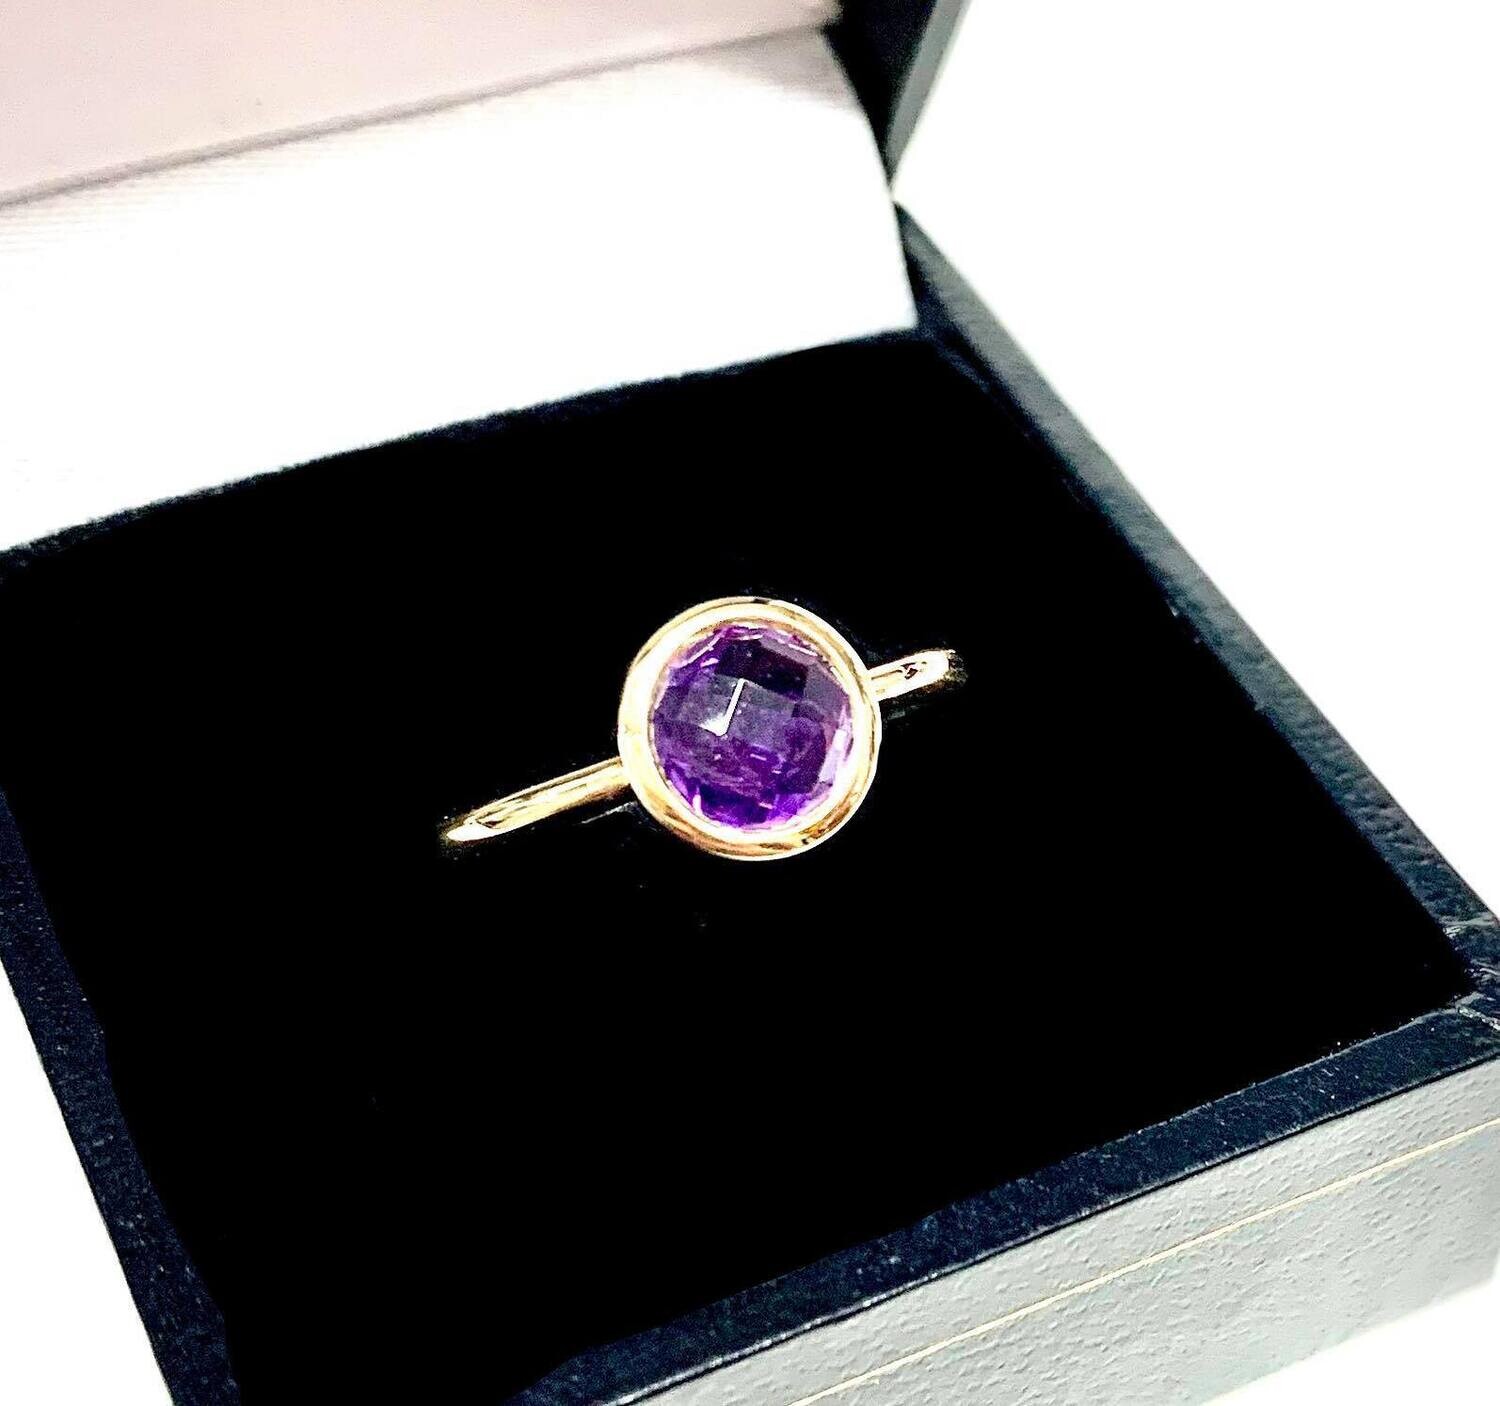 New 9ct Yellow Gold Amethyst Ring, UK Size O